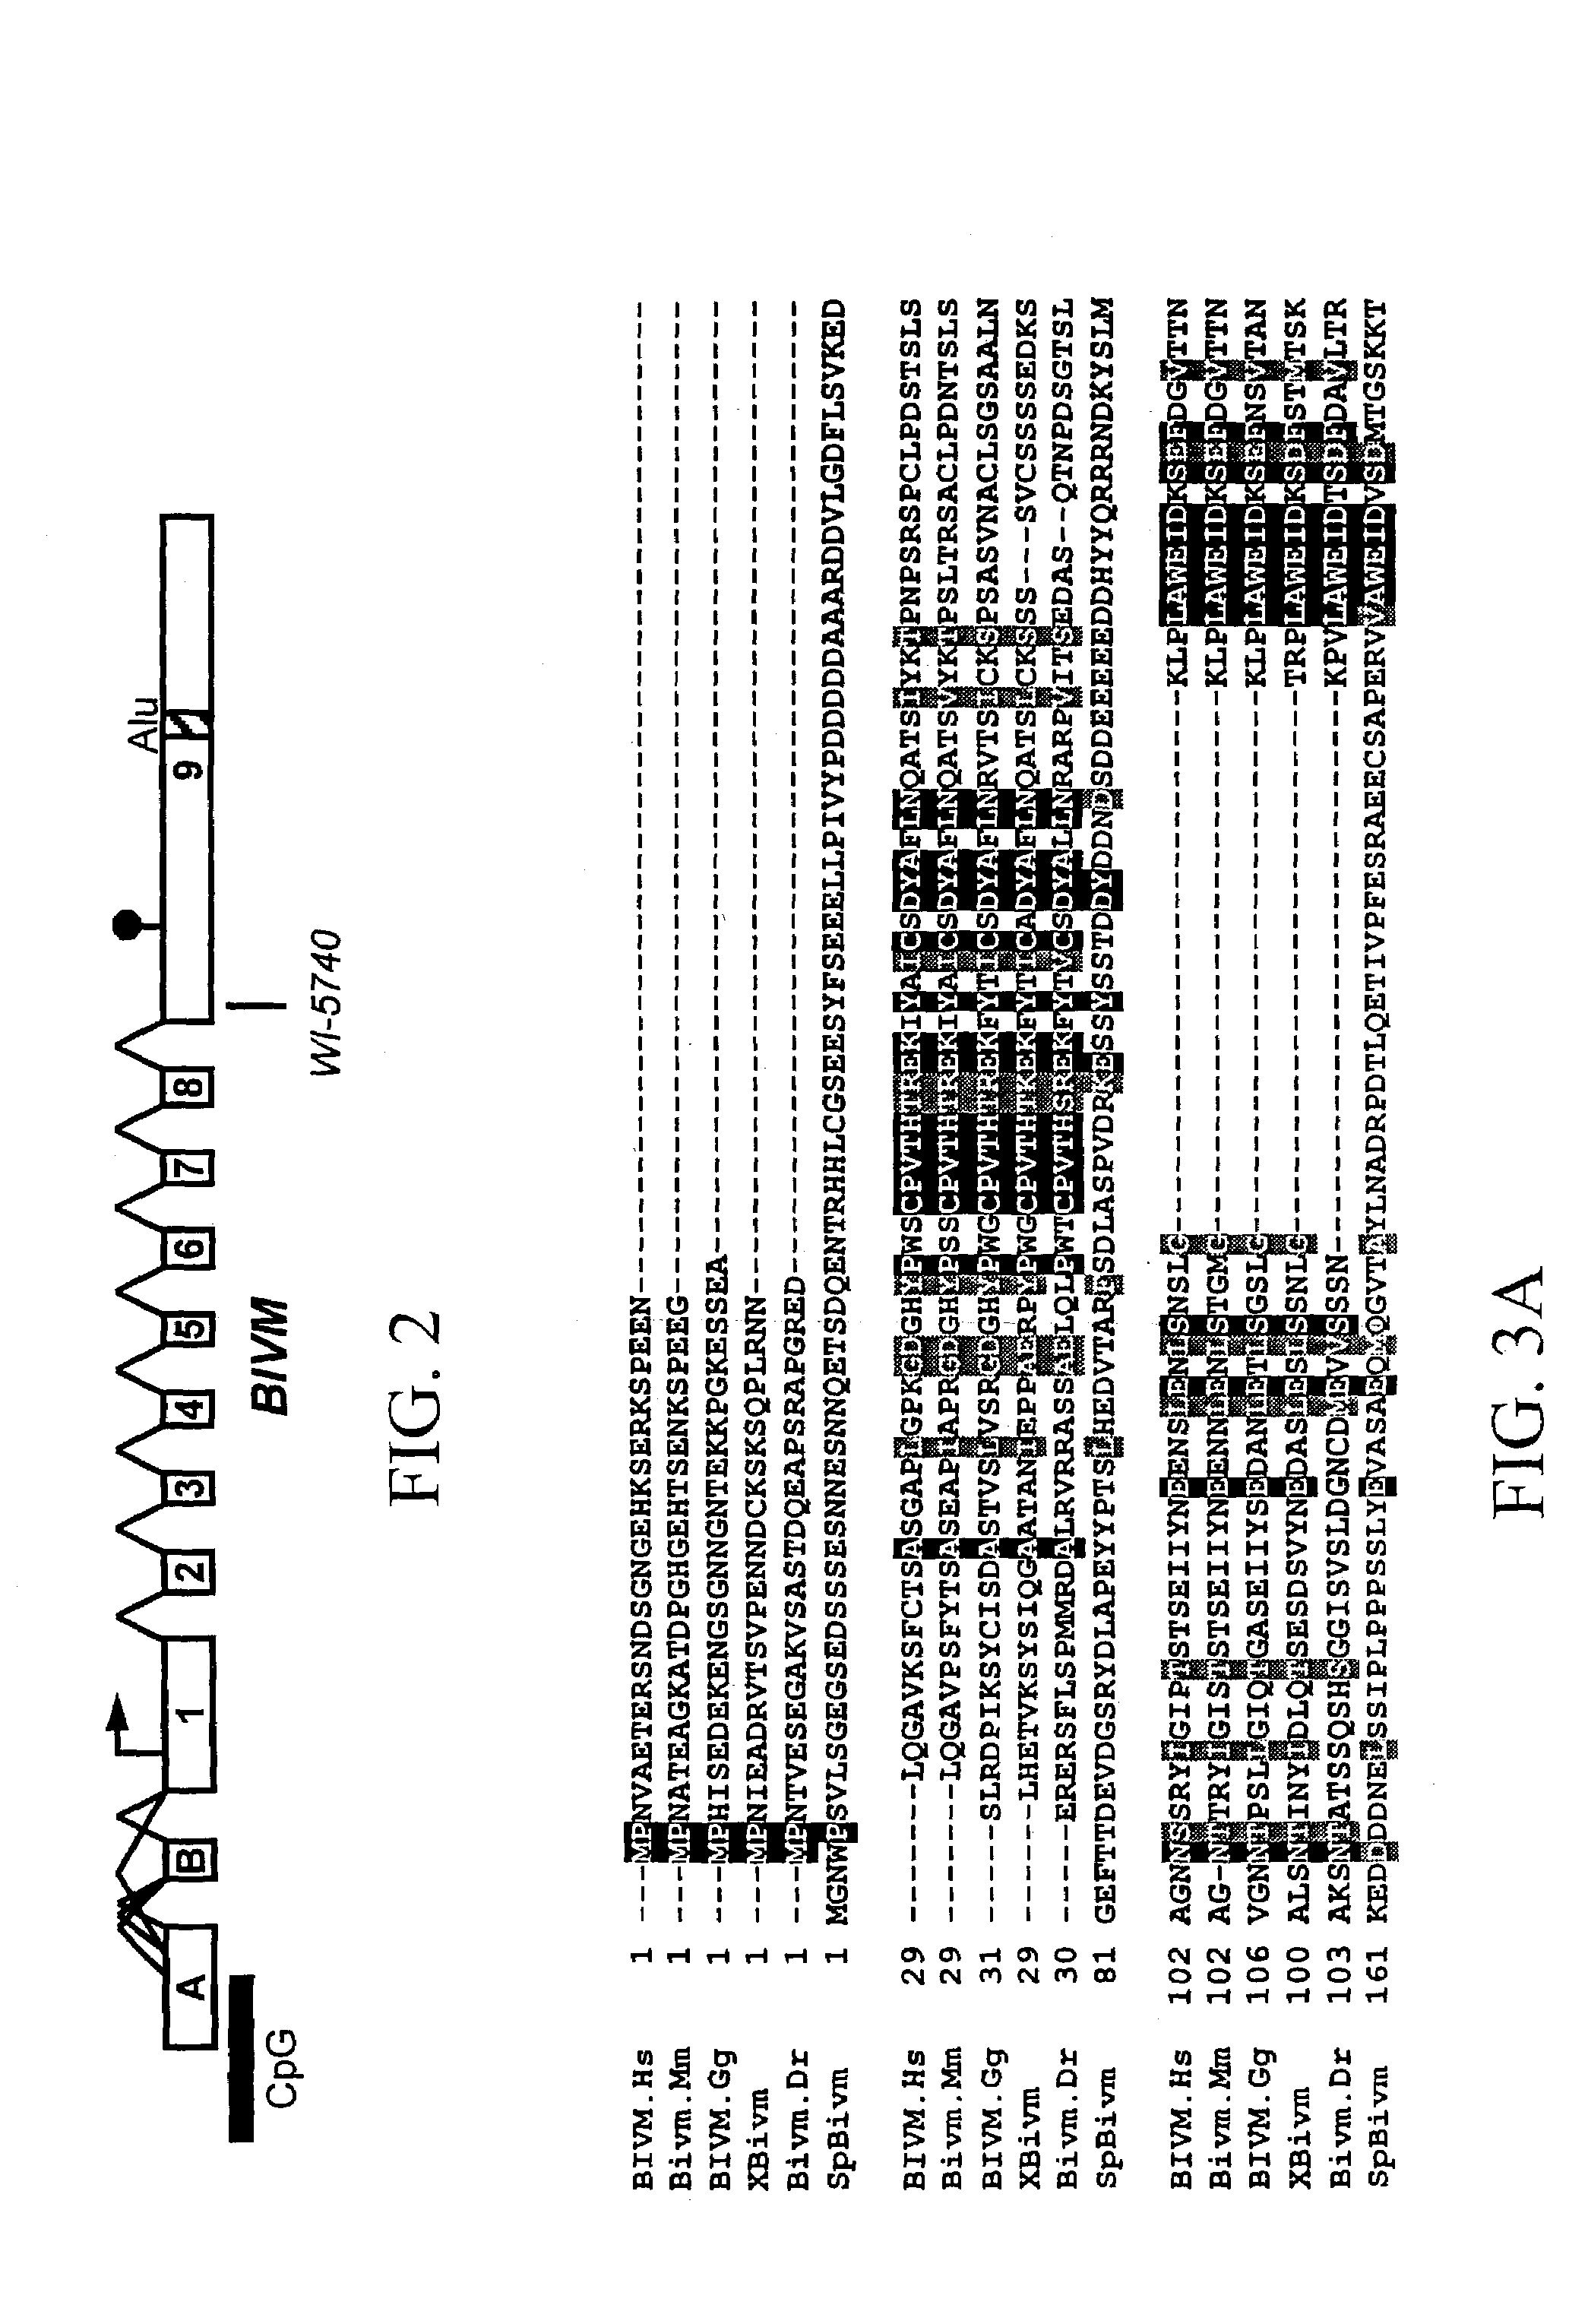 BIVM (basic, immunoglobulin-like variable motif-containing) gene, transcriptional products, and uses thereof